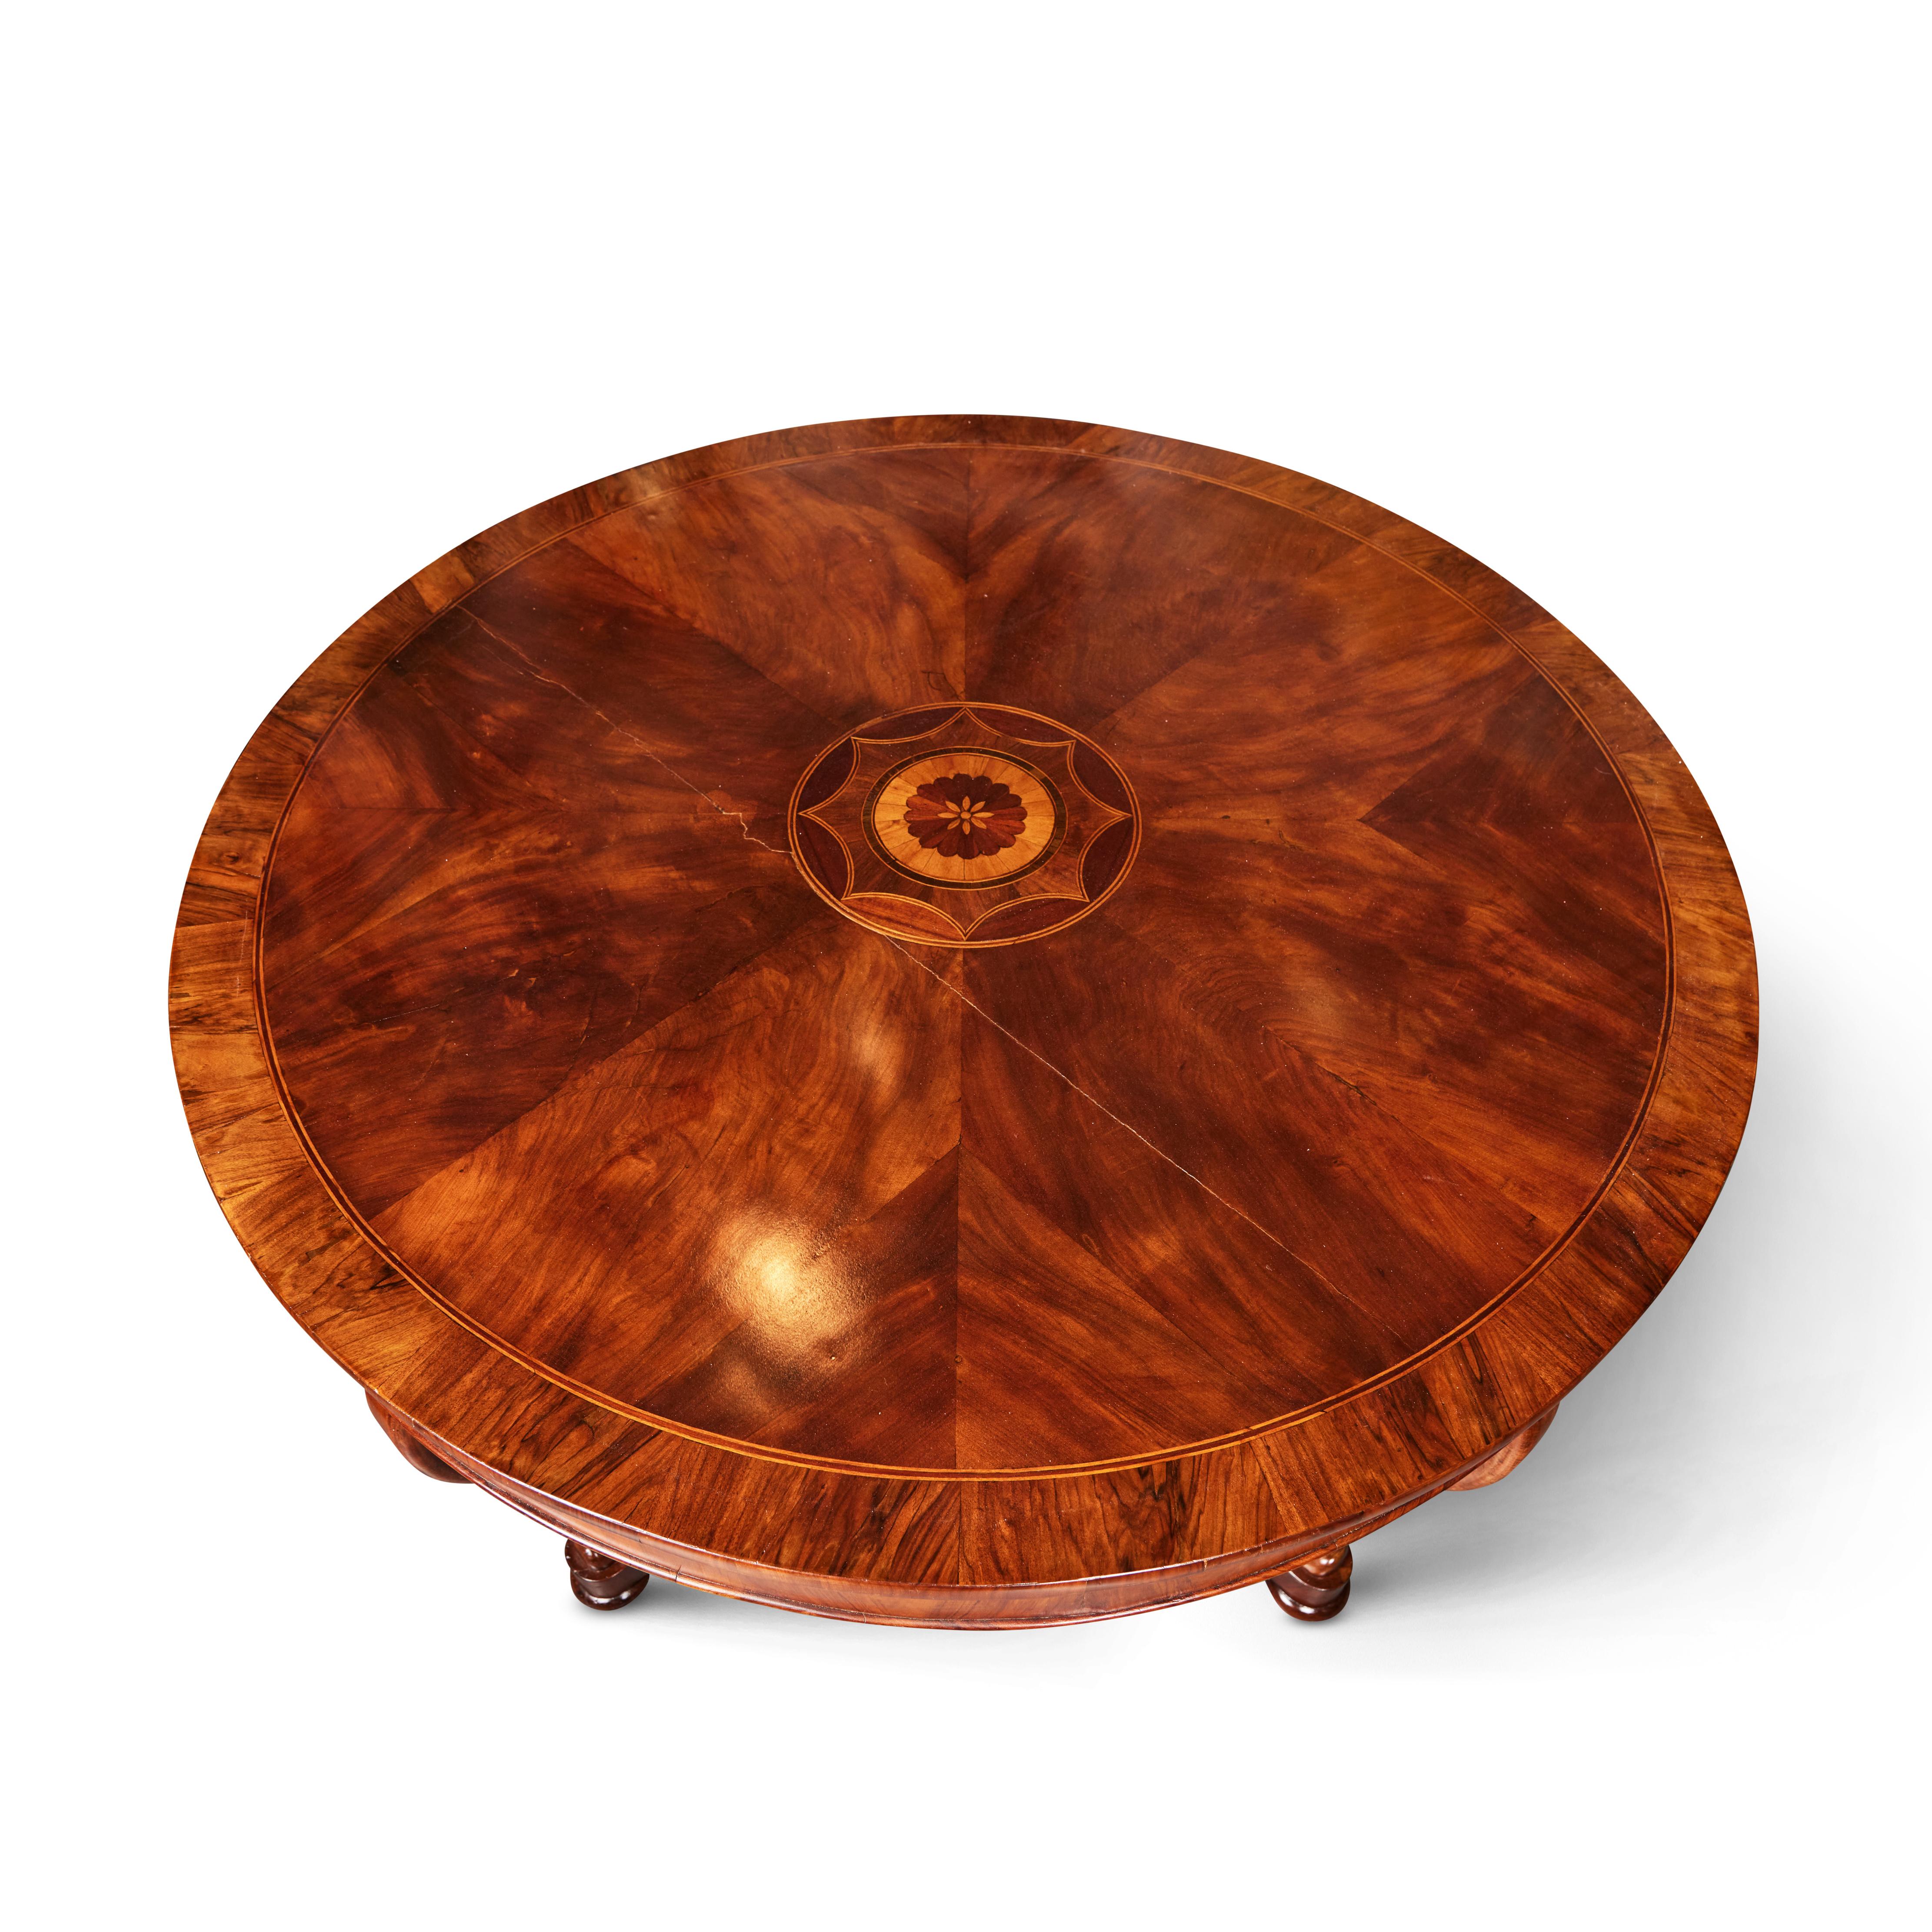 A large scale, hand-carved, veneered and inlaid, walnut and fruitwood center table with a book matched top centered on a  radiant medallion. The base featuring a central, turned column surrounded by four, unusual, two-tier, convex-concave scrolling